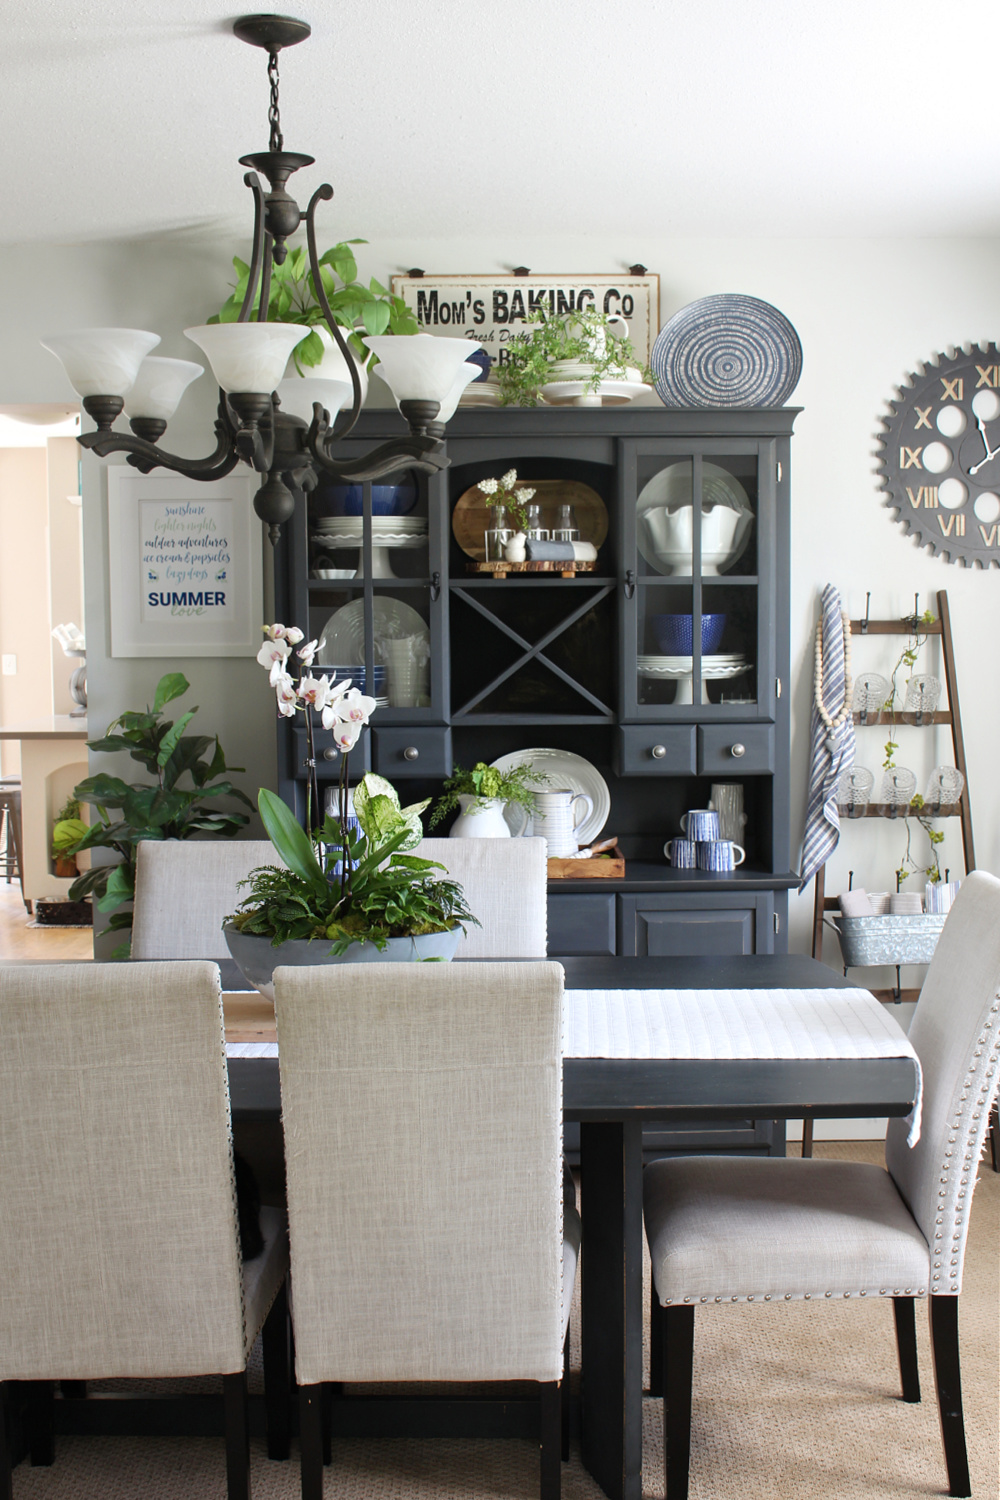 Black hutch and dining room table decked out in blues and greens for summer.